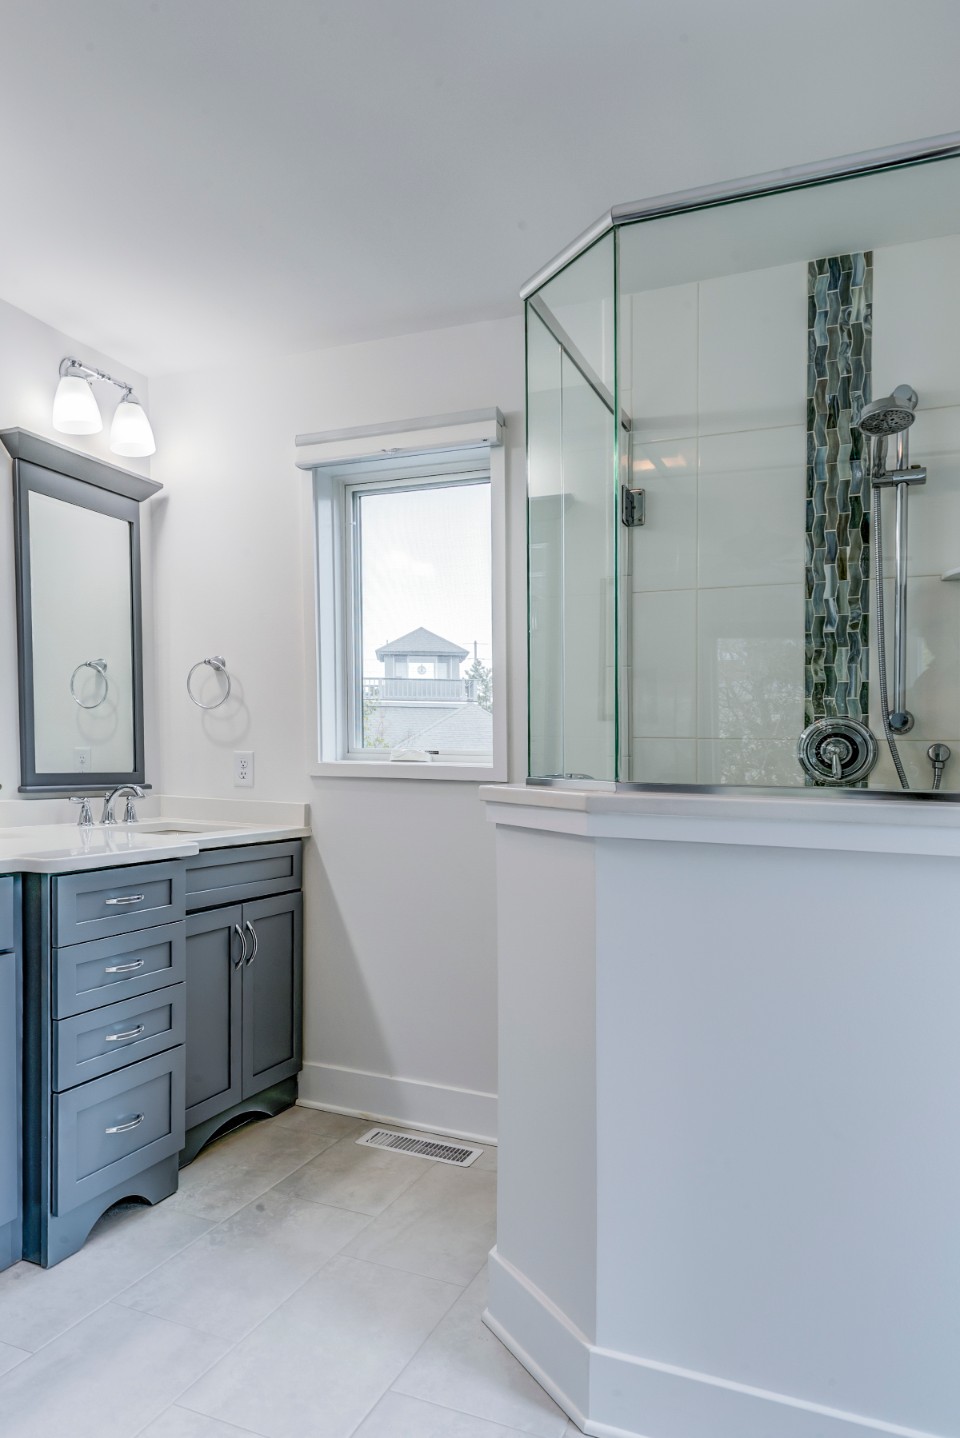 Cotton Patch Hills Bathroom Remodel in Bethany Beach DE with White Wall Paint and Glass Upper Half Shower Walls